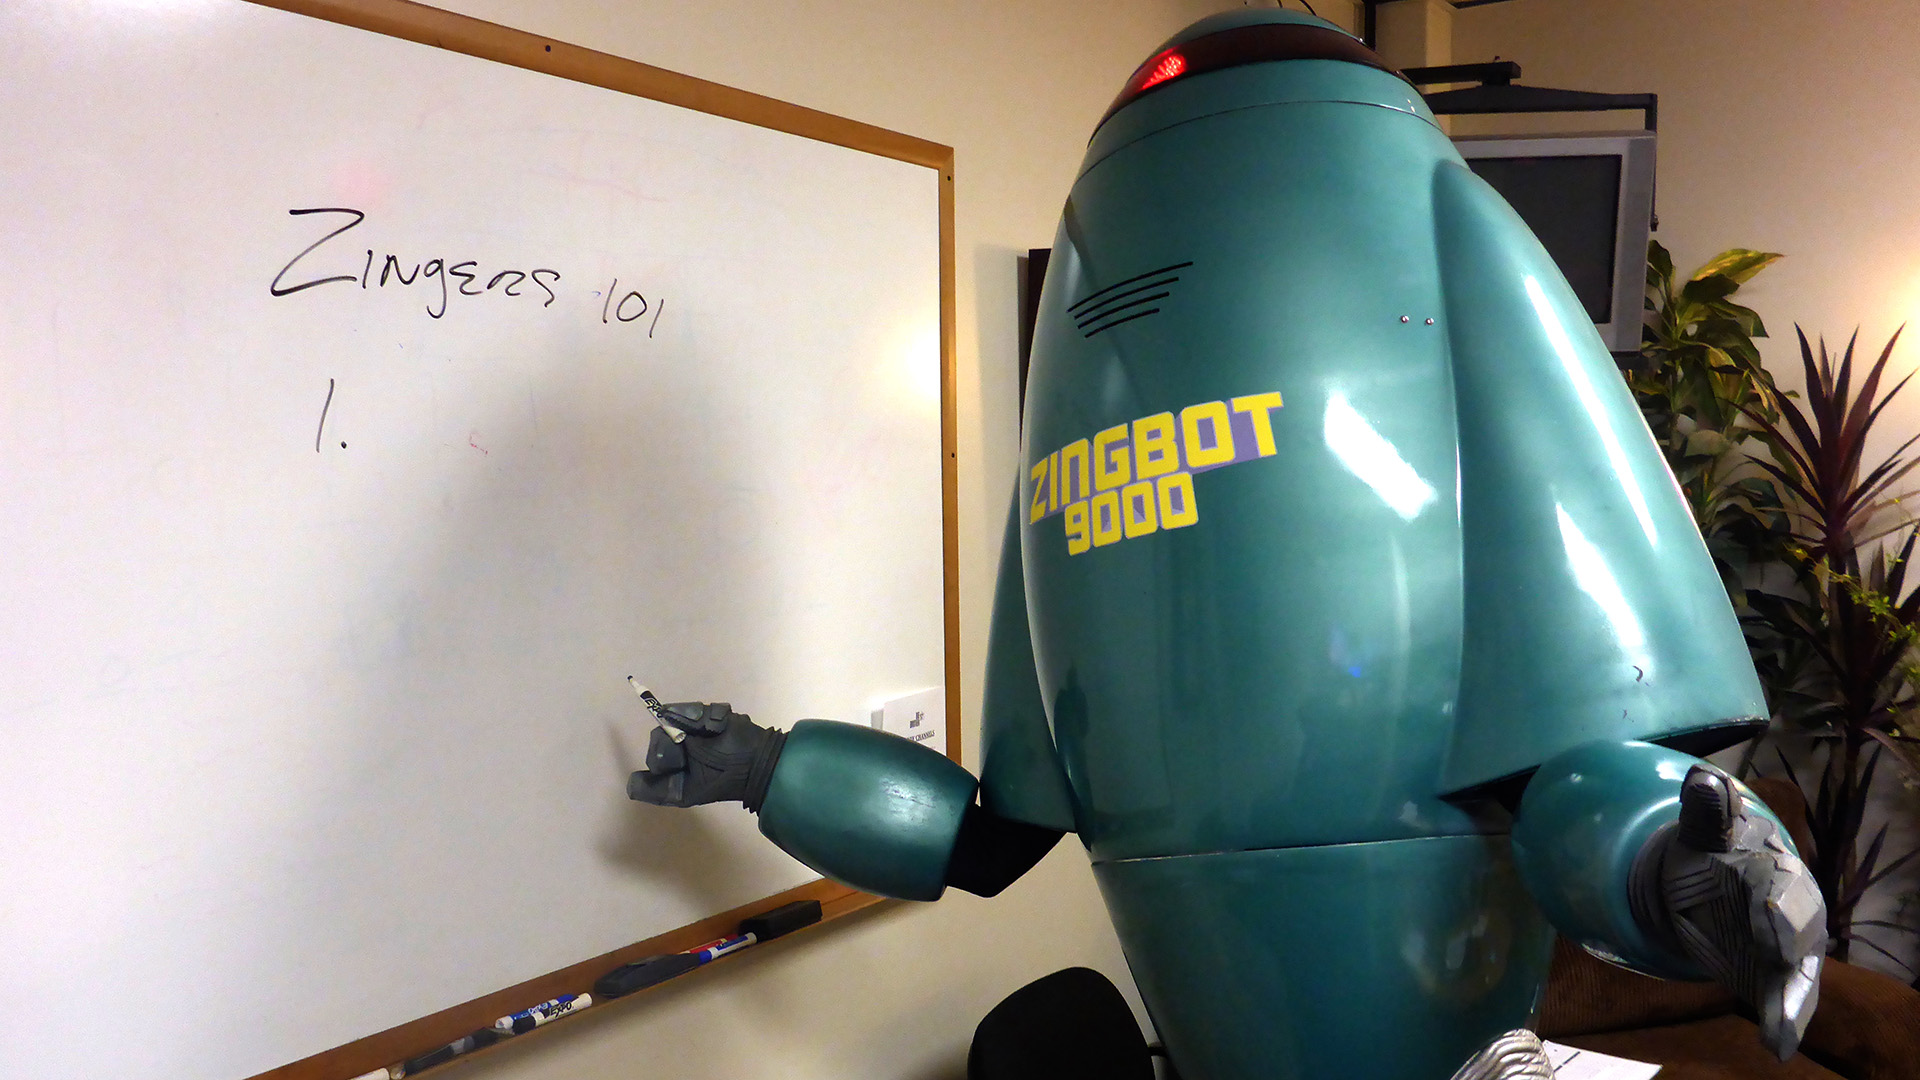 The first appearance by Zingbot